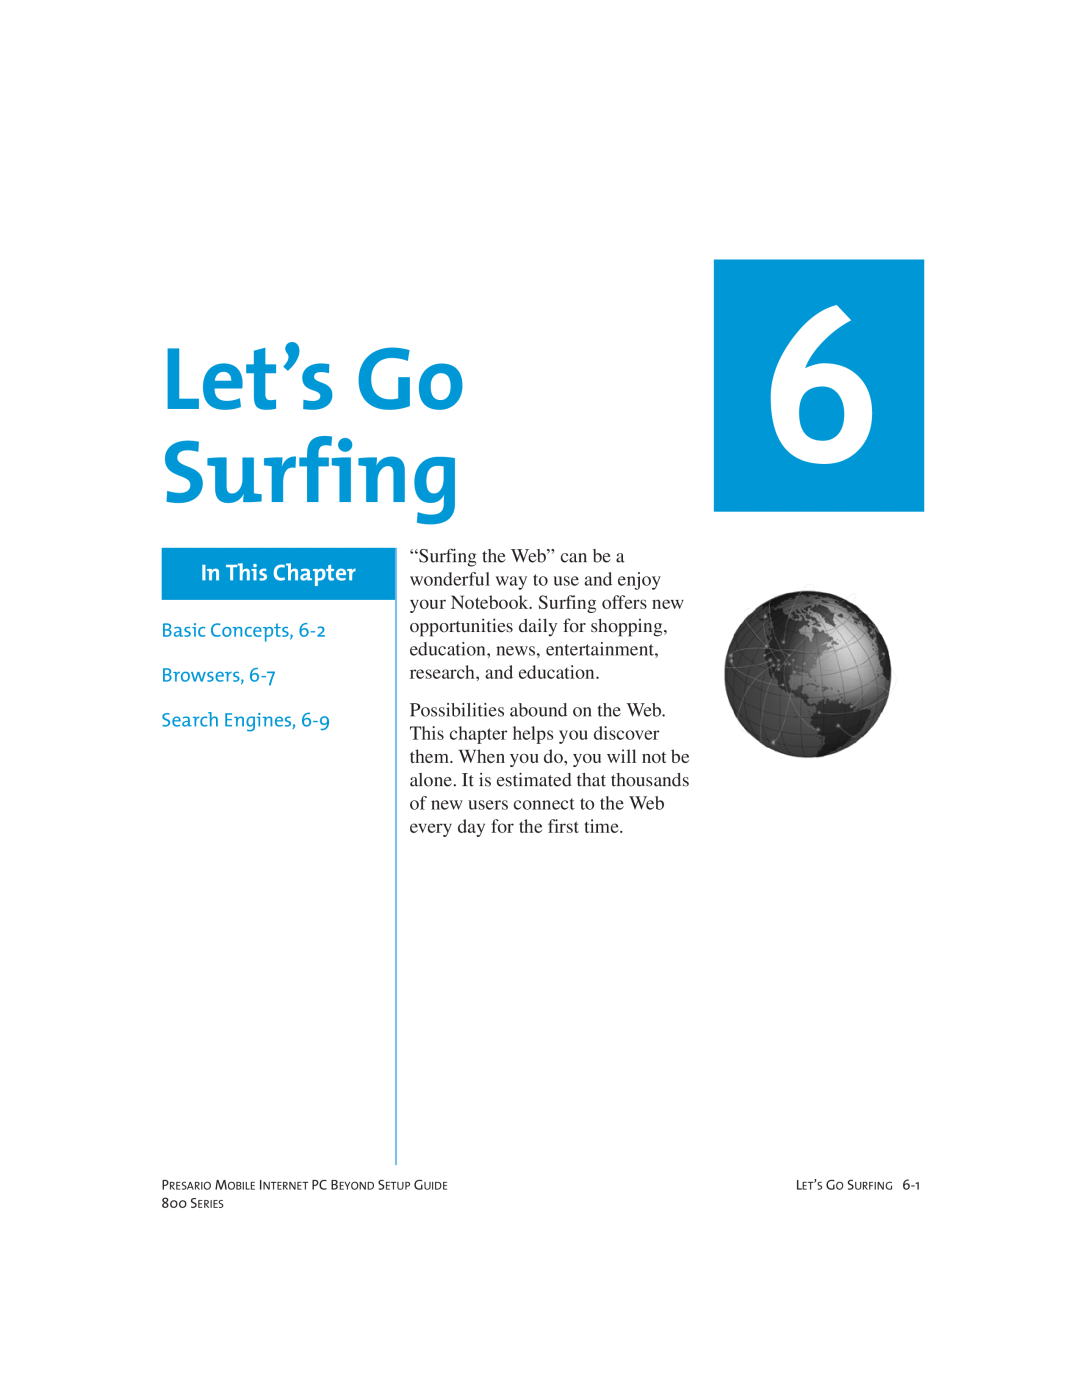 Compaq 800 manual Let’s Go Surfing, In This Chapter, Basic Concepts, Browsers, Search Engines 